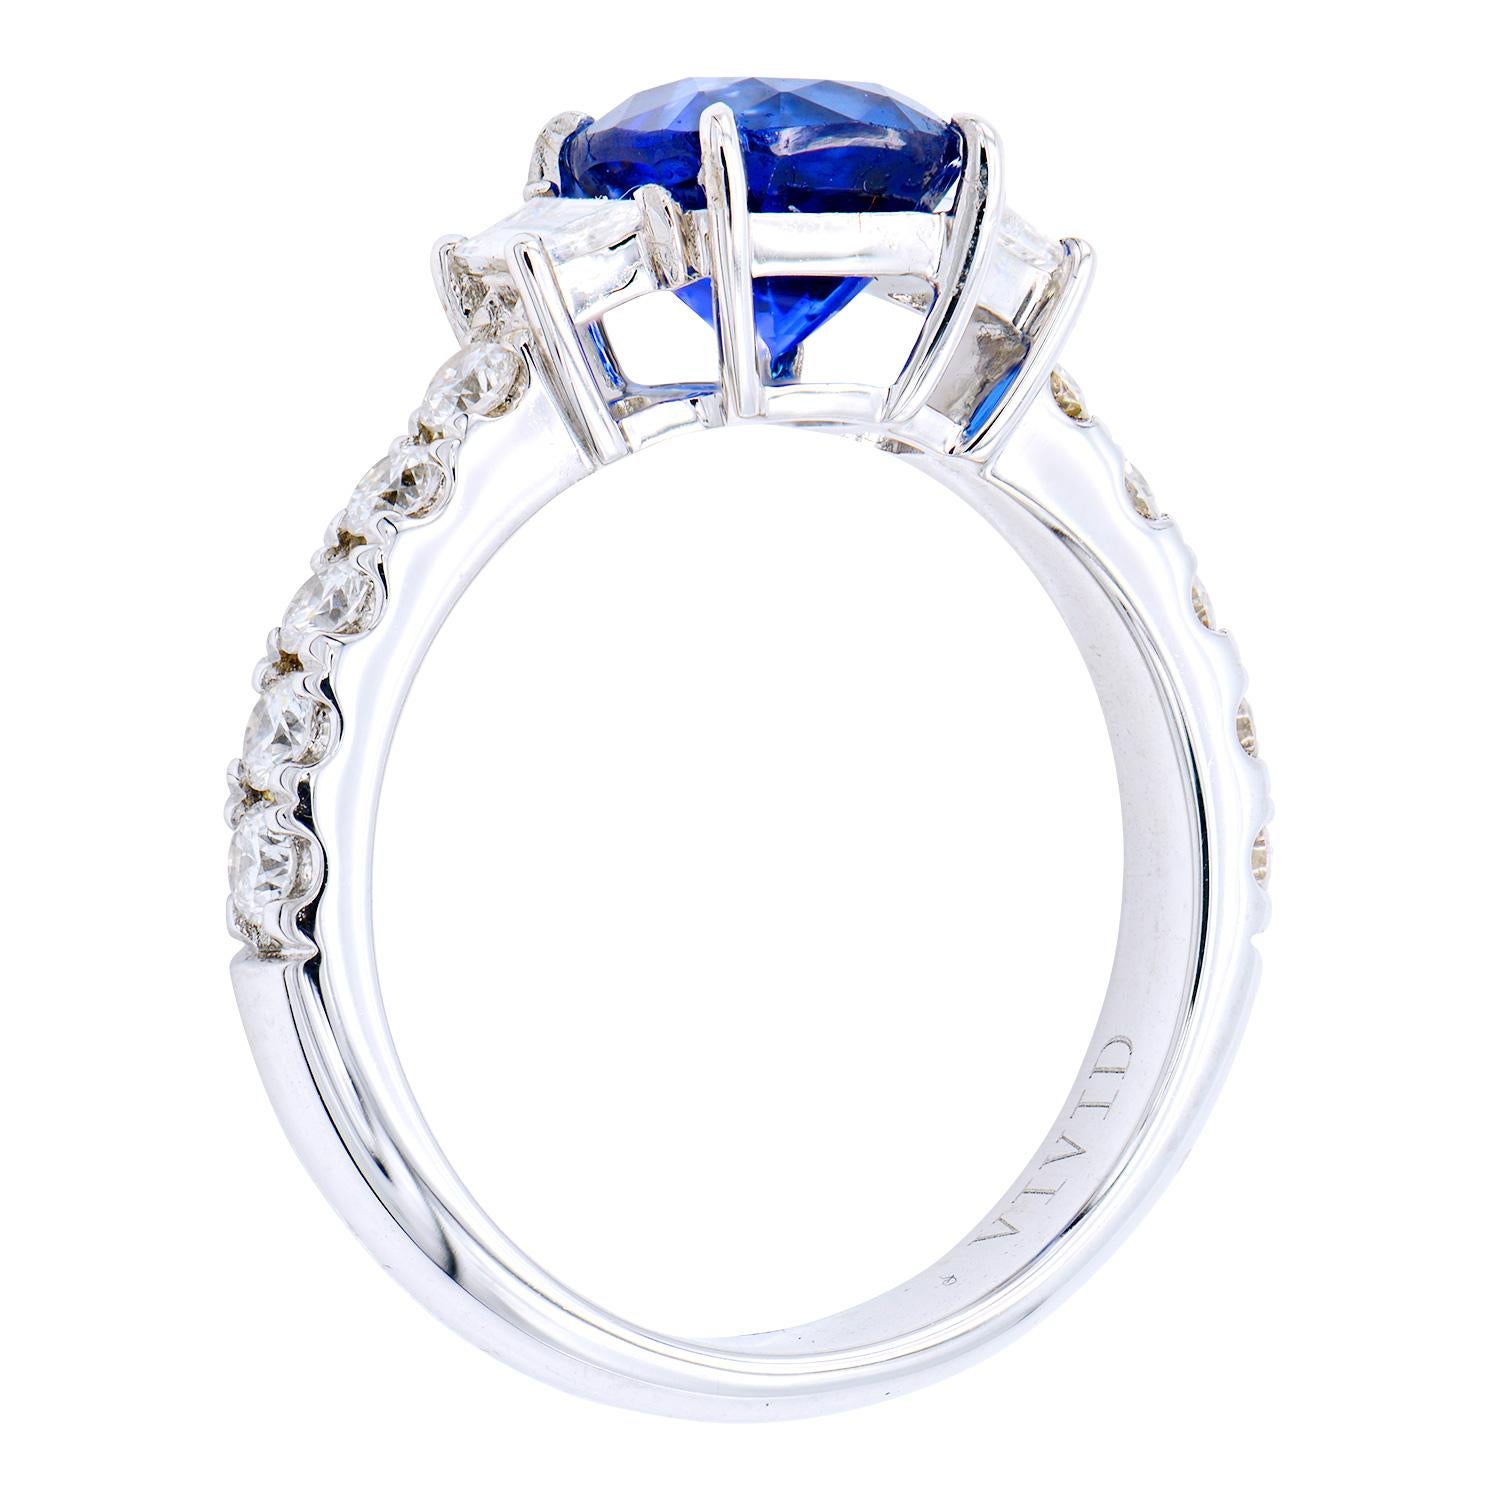 This Ceylon 2.18 carat royal blue sapphire is set with 2 diamond trapezoids totaling 0.20 carats on either side followed by 10 more round diamonds on the band totaling 0.43 carats. This gorgeous ring is set in 4.5 grams of 18 karat white gold and is